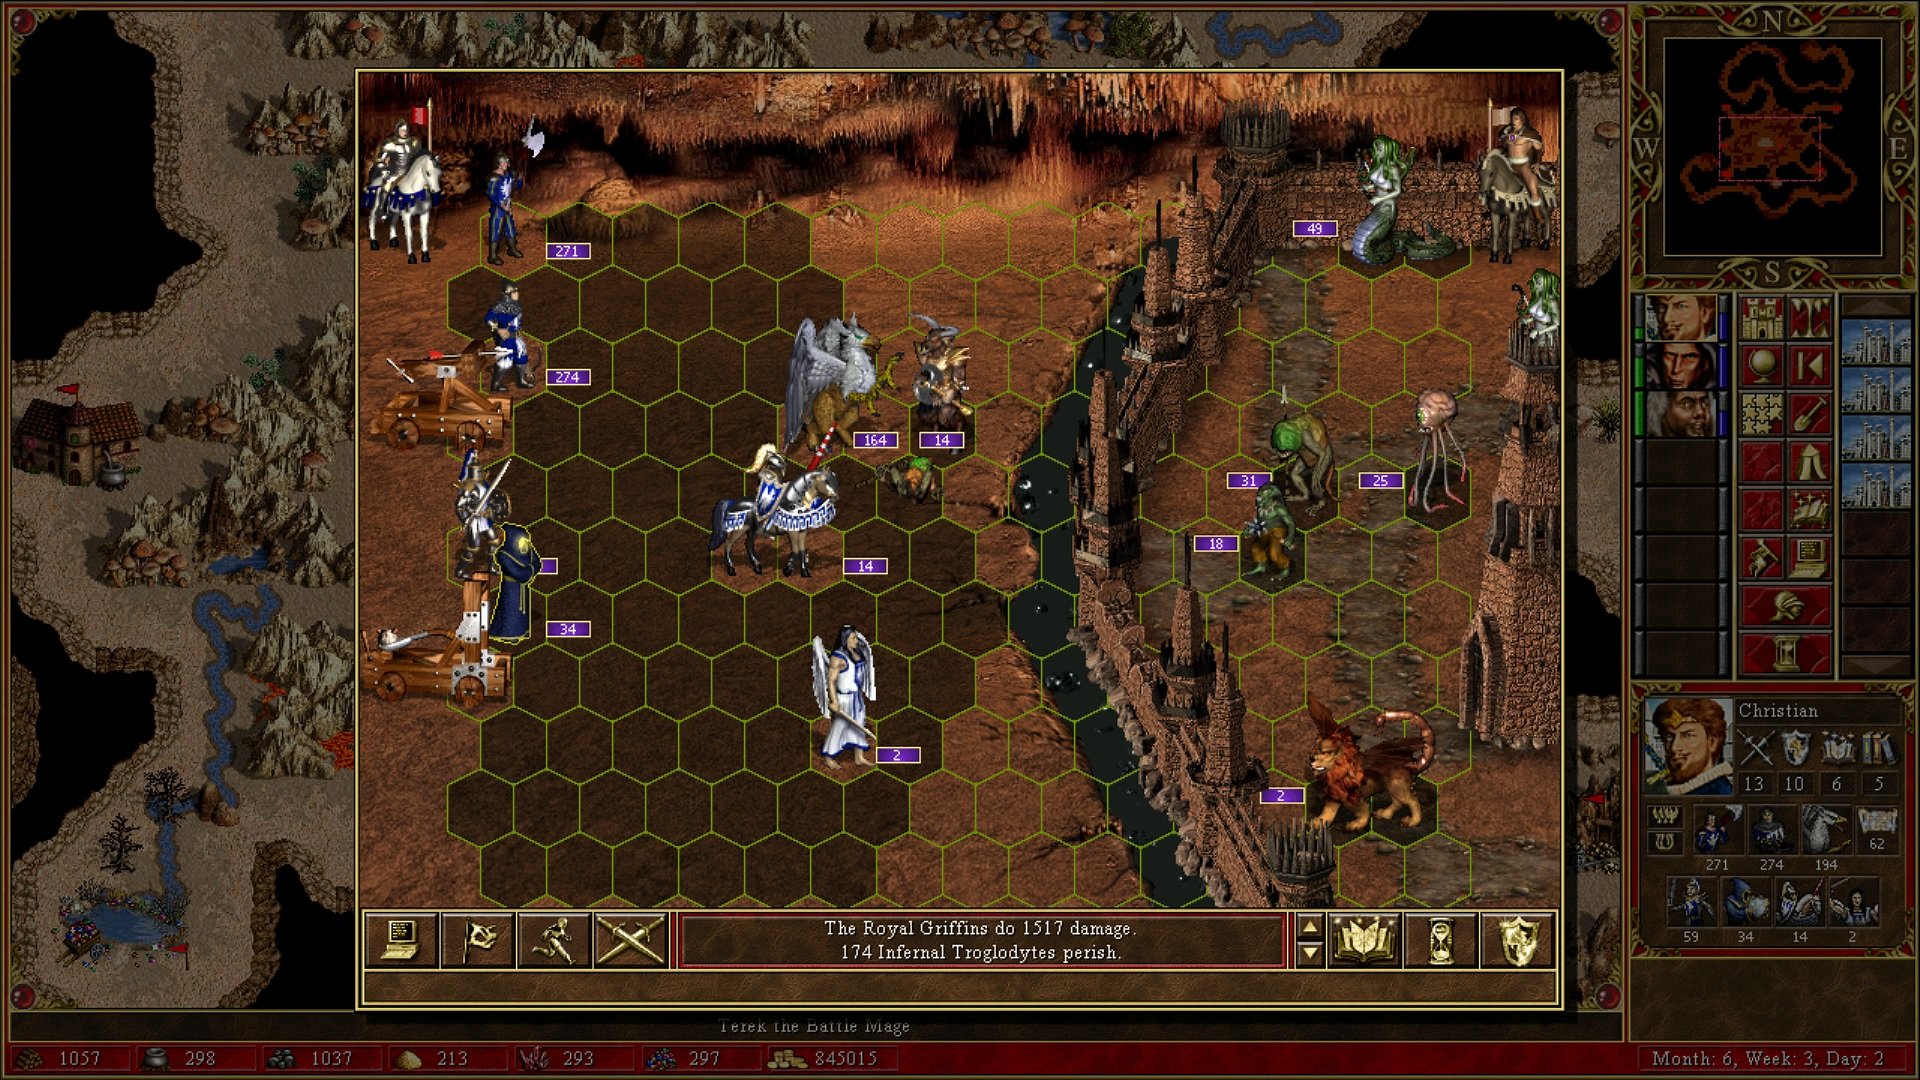 Игры heroes of might and magic 3. Герои меча и магии 3. Heroes of might and Magic III игра. Герои меча и магии 3 ремастер. Герои меча и магии 3 геймплей.